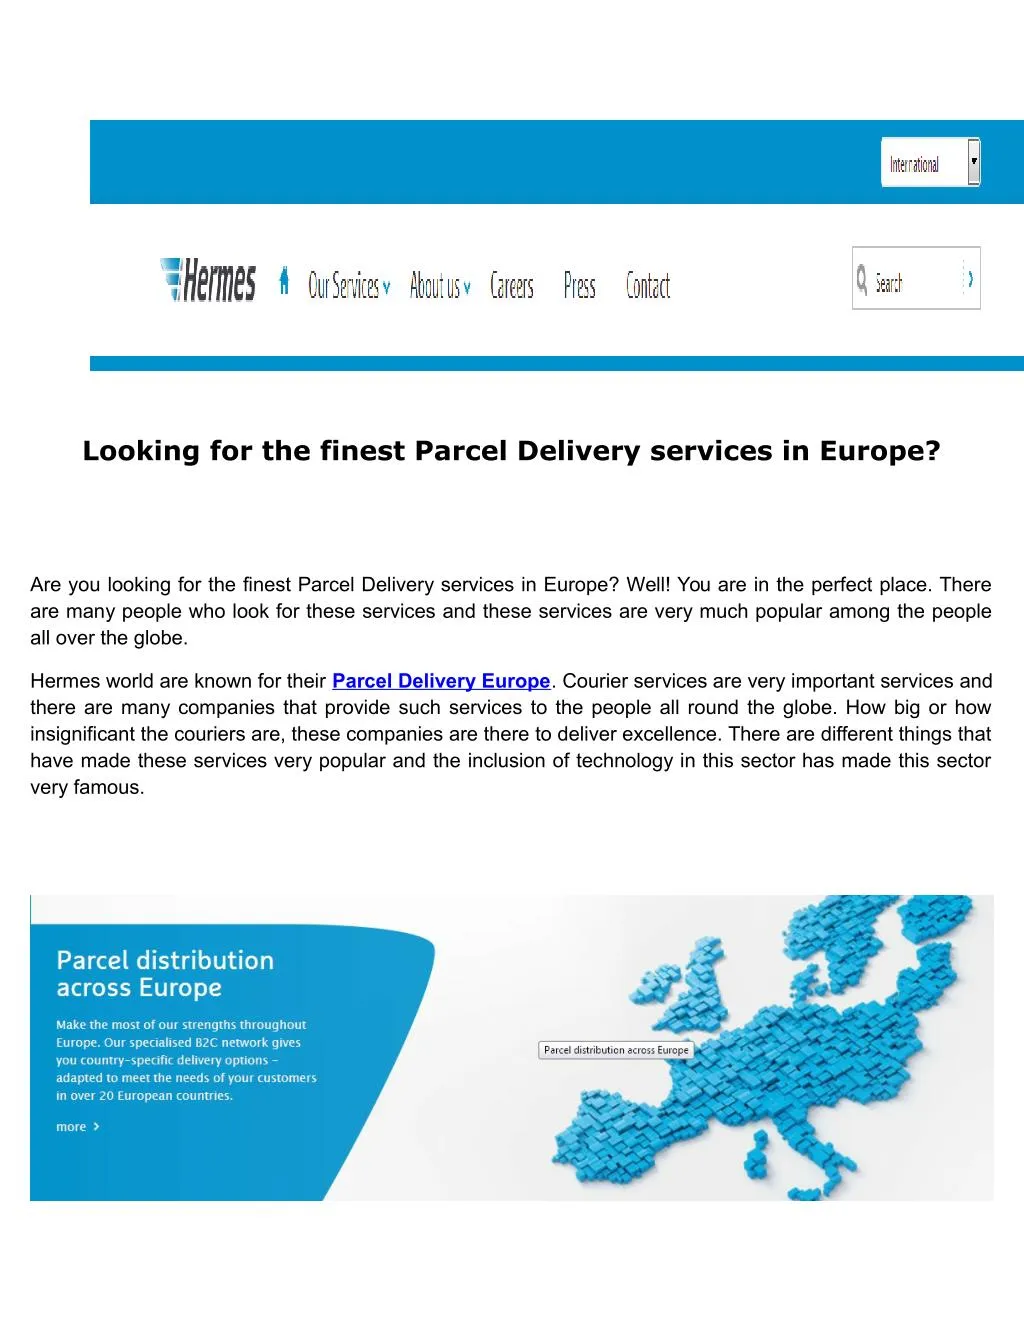 looking for the finest parcel delivery services